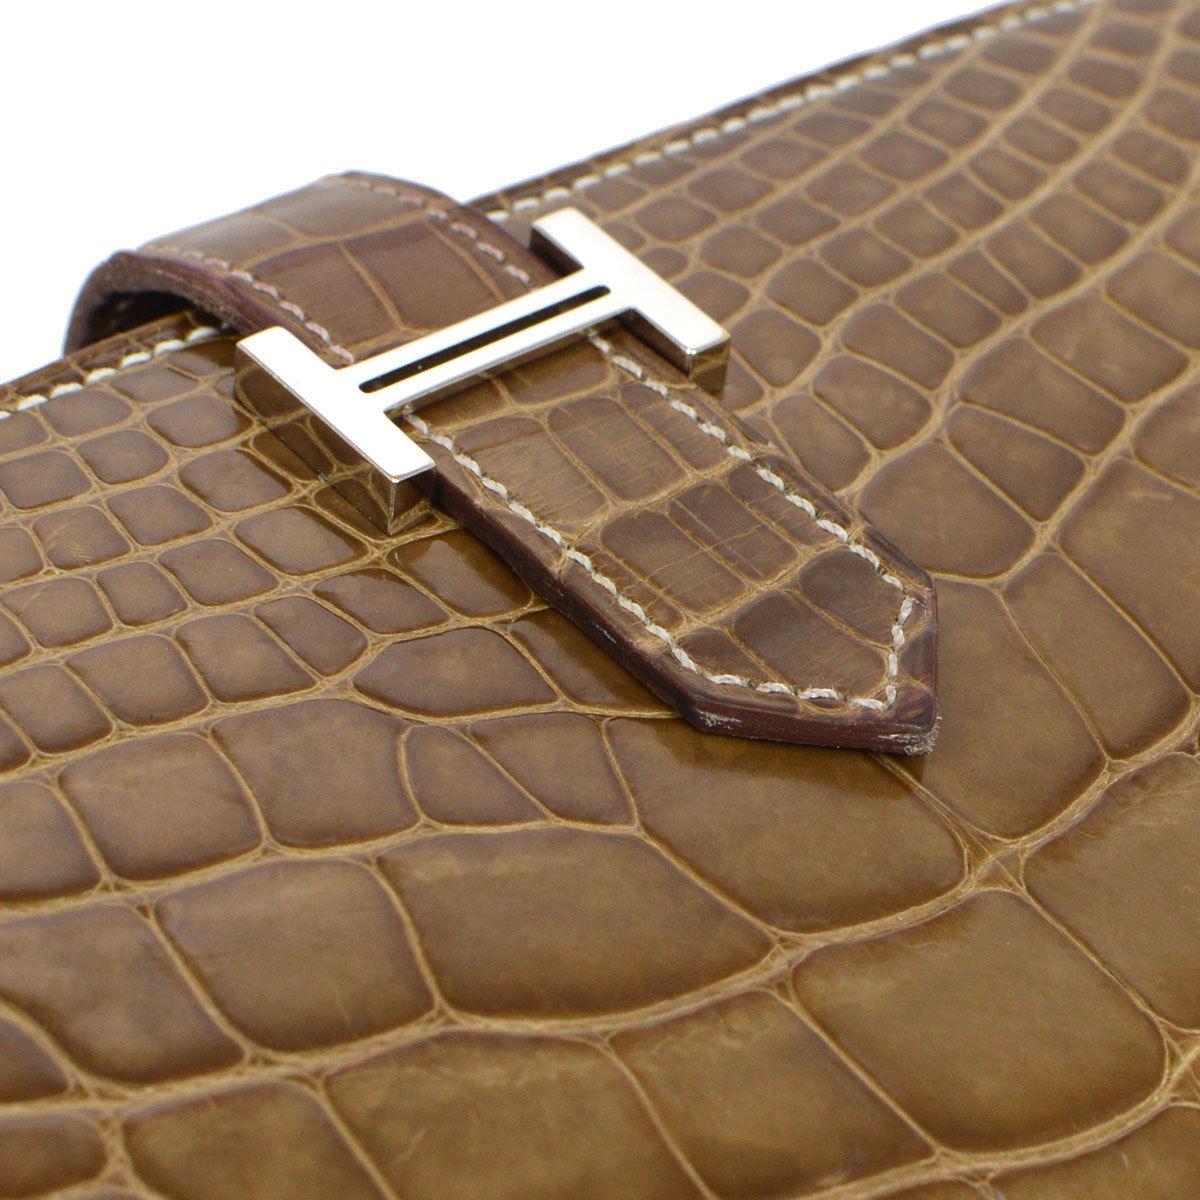 Hermes Cognac Chocolate Crocodile Palladium Evening Clutch Wallet Bag in Box

Alligator 
Palladium hardware
Fold in buckle closure
Leather lining
Date code present
Made in France
Features zip closure, bill compartment and card slots 
Measures 7